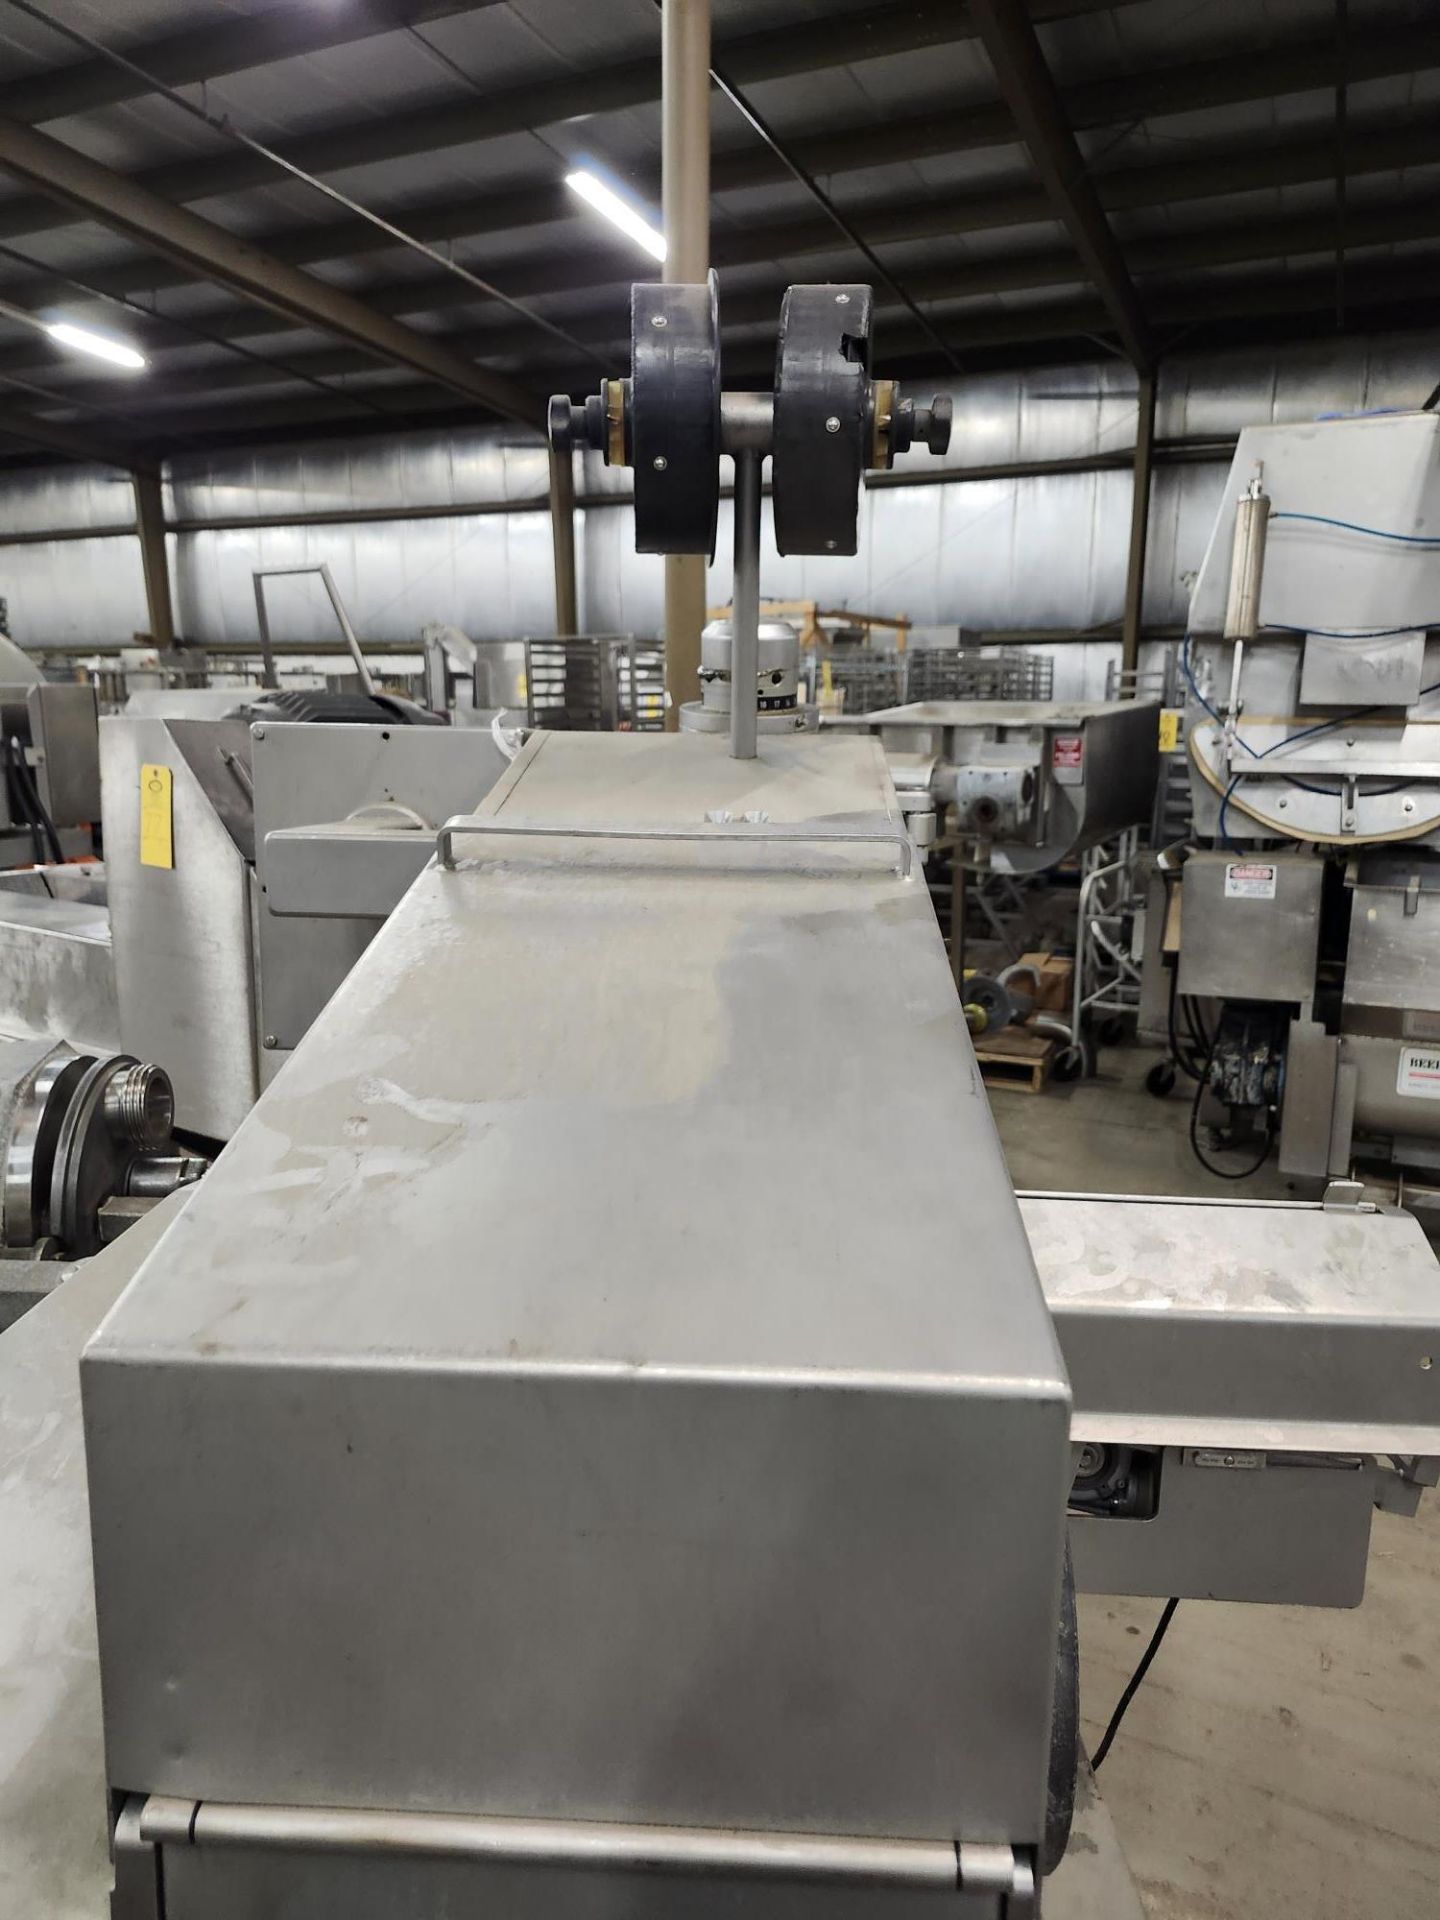 Poly Clip Mdl. FCA3430 Chub Machine (has damage to control screen) (Located in Sandwich, IL) - Image 9 of 9